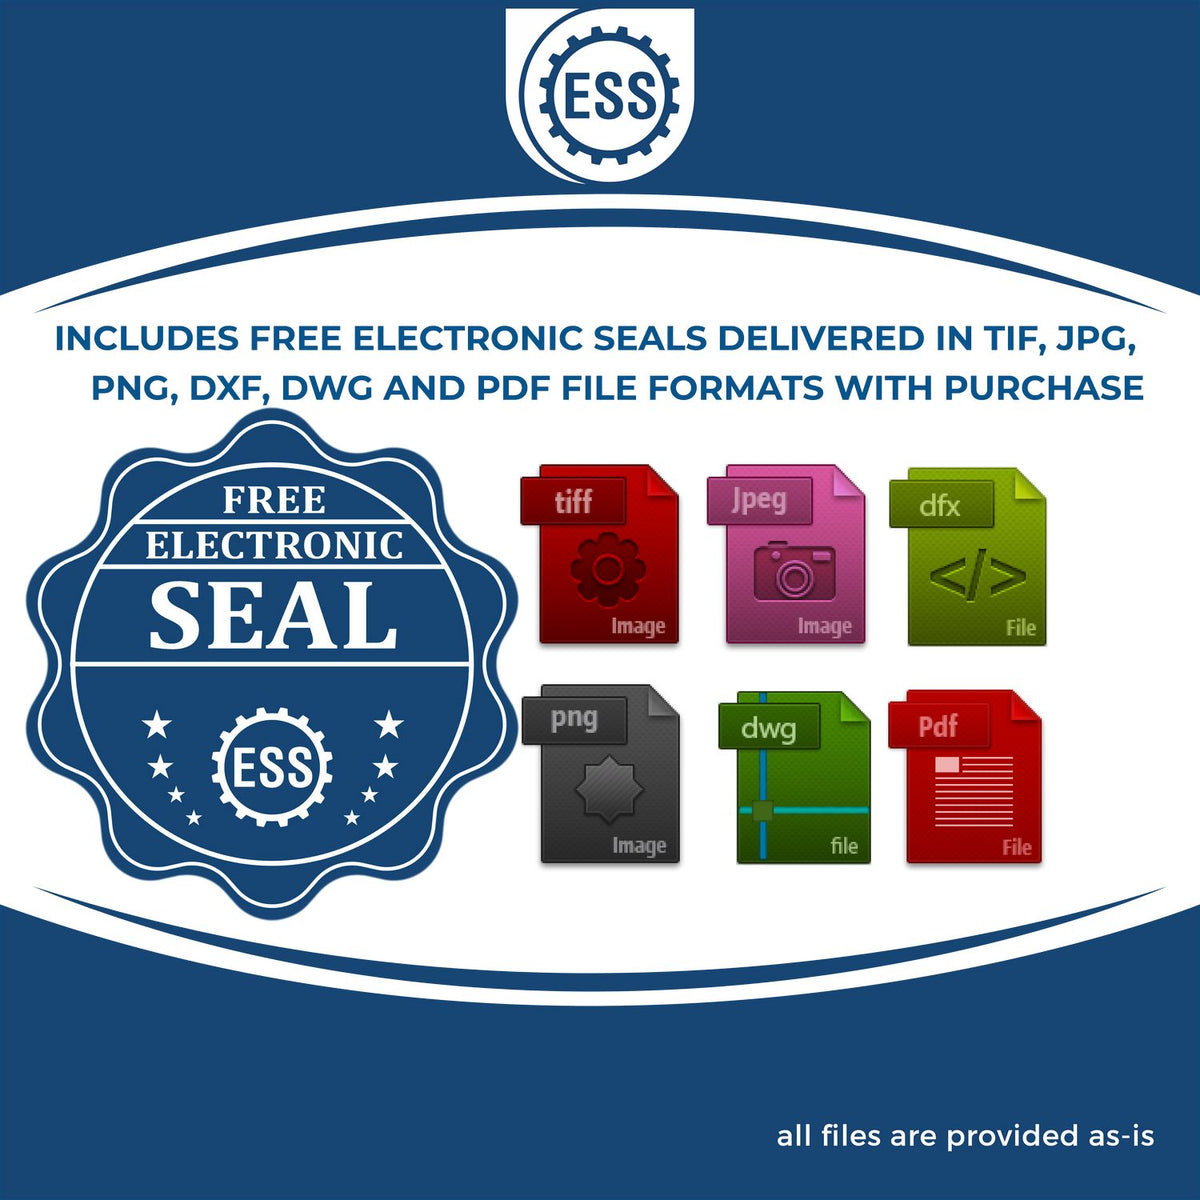 An infographic for the free electronic seal for the Extended Long Reach Nevada Surveyor Embosser illustrating the different file type icons such as DXF, DWG, TIF, JPG and PNG.